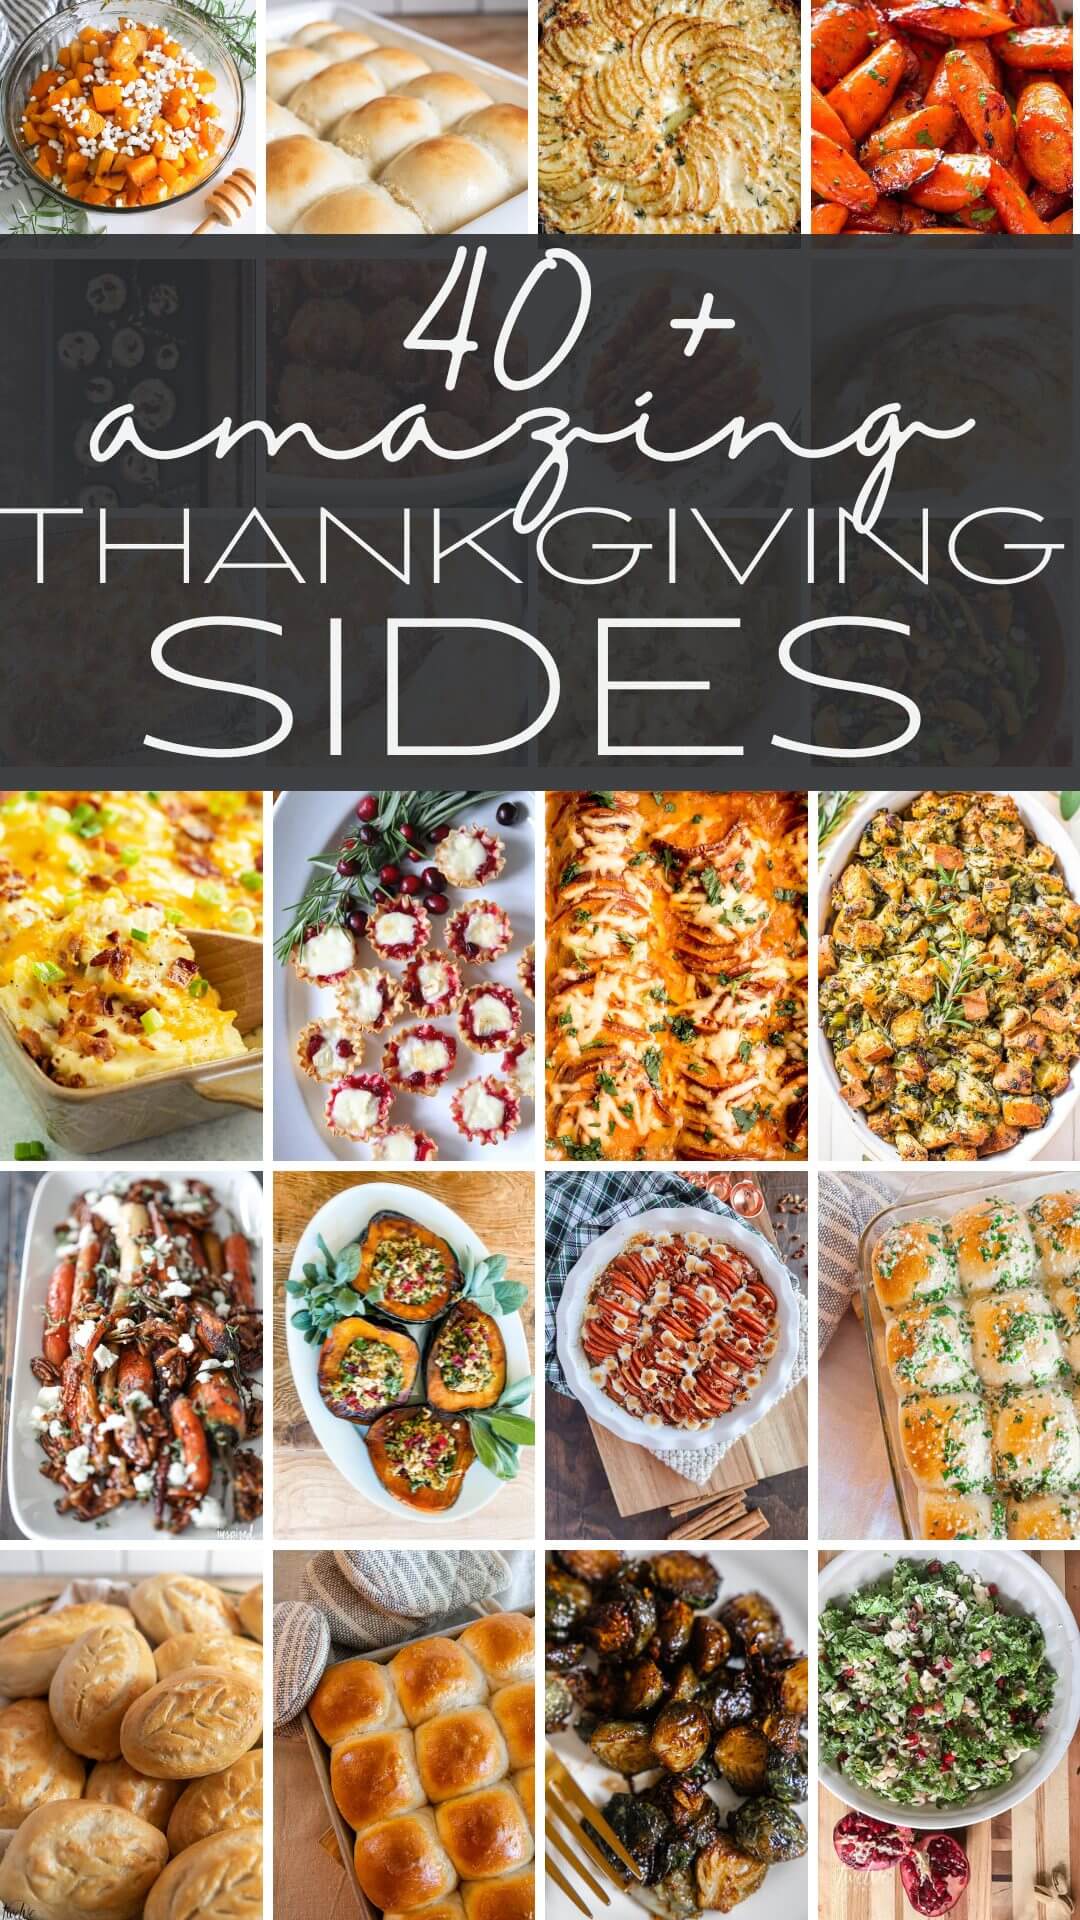 Over 45 amazingly easy Thanksgiving side dishes perfect for your next Thanksgiving celebration. Make sure to try these recipes!